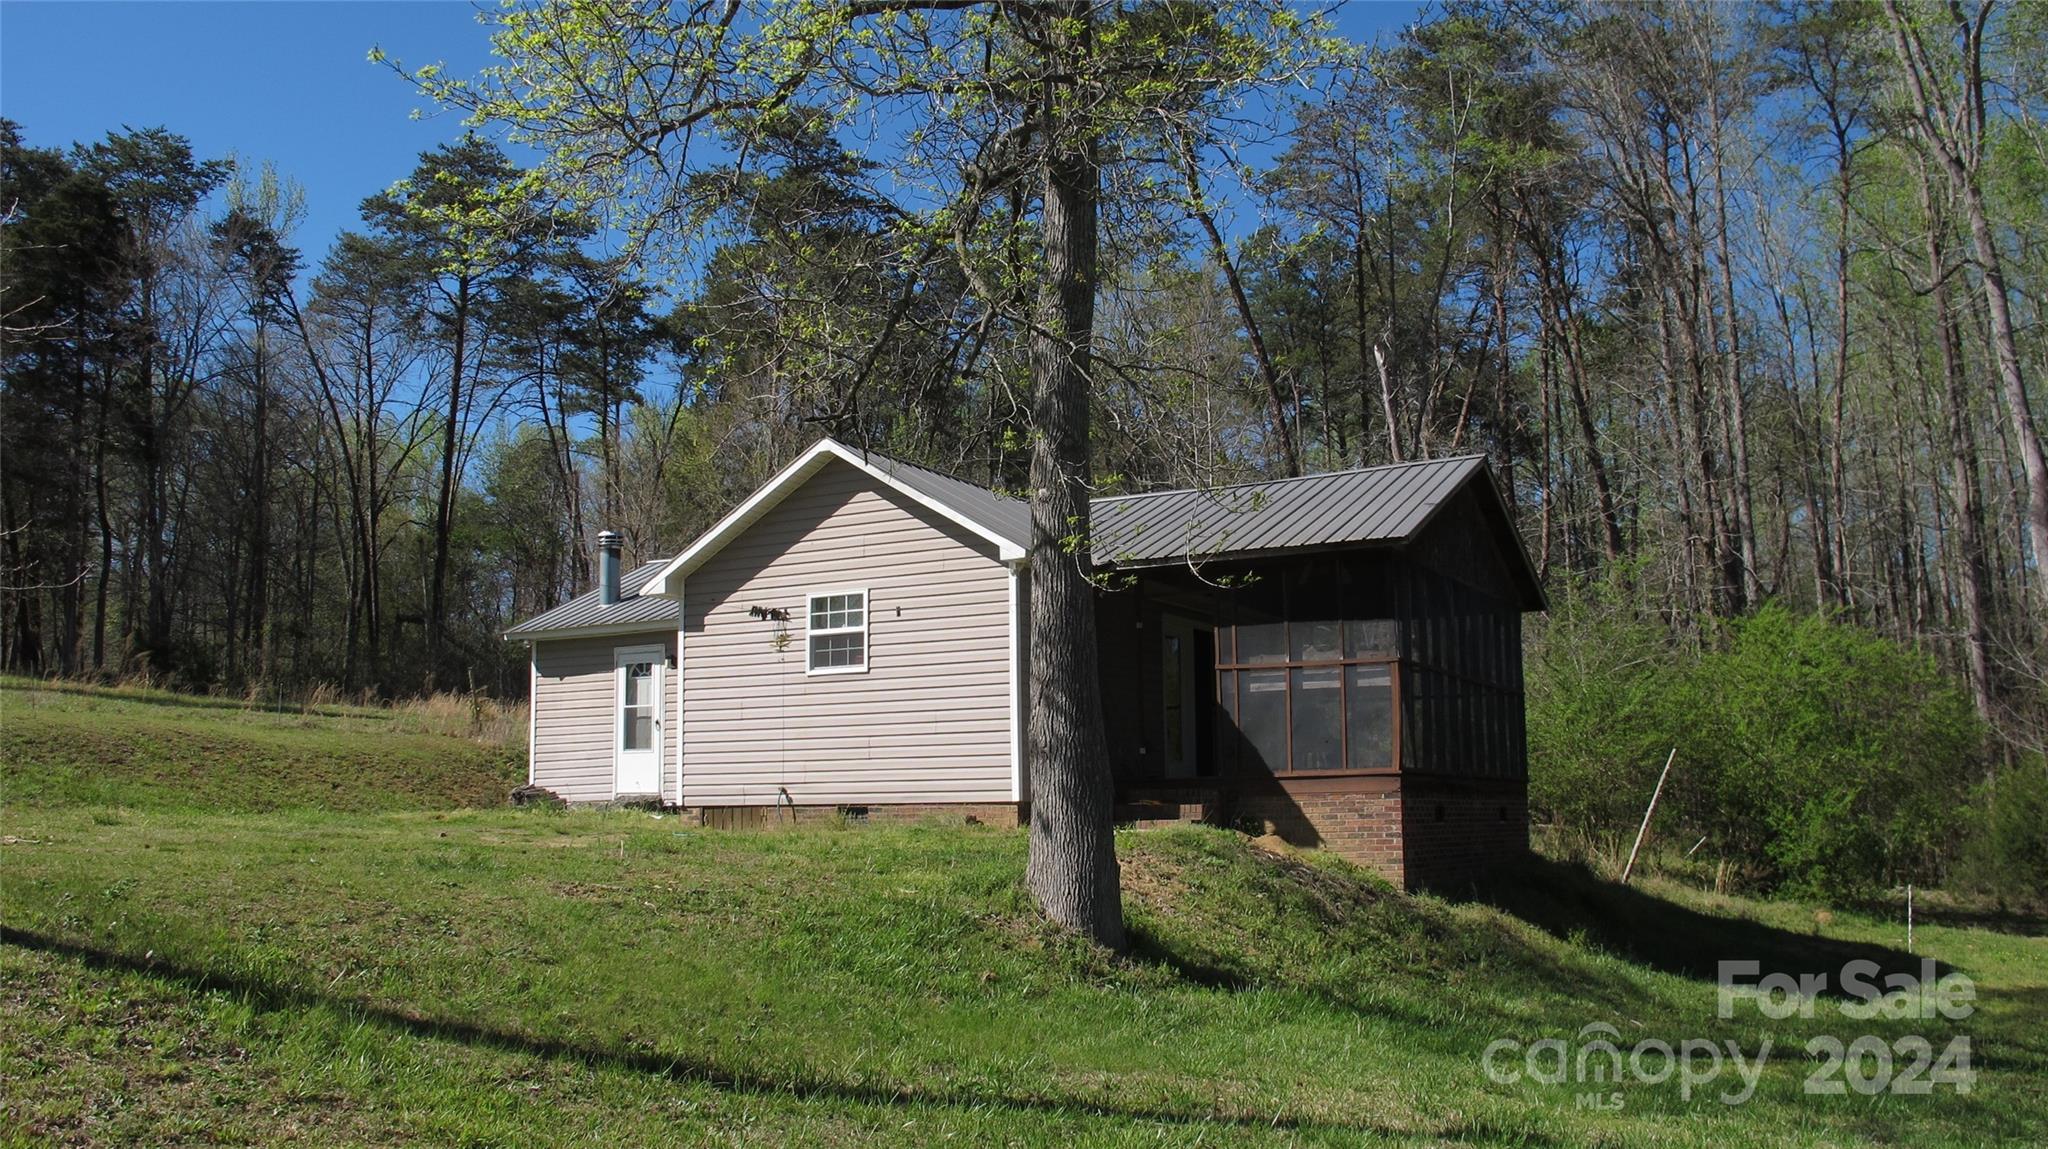 Photo one of 602 Rothrock Rd Rockwell NC 28138 | MLS 4126689